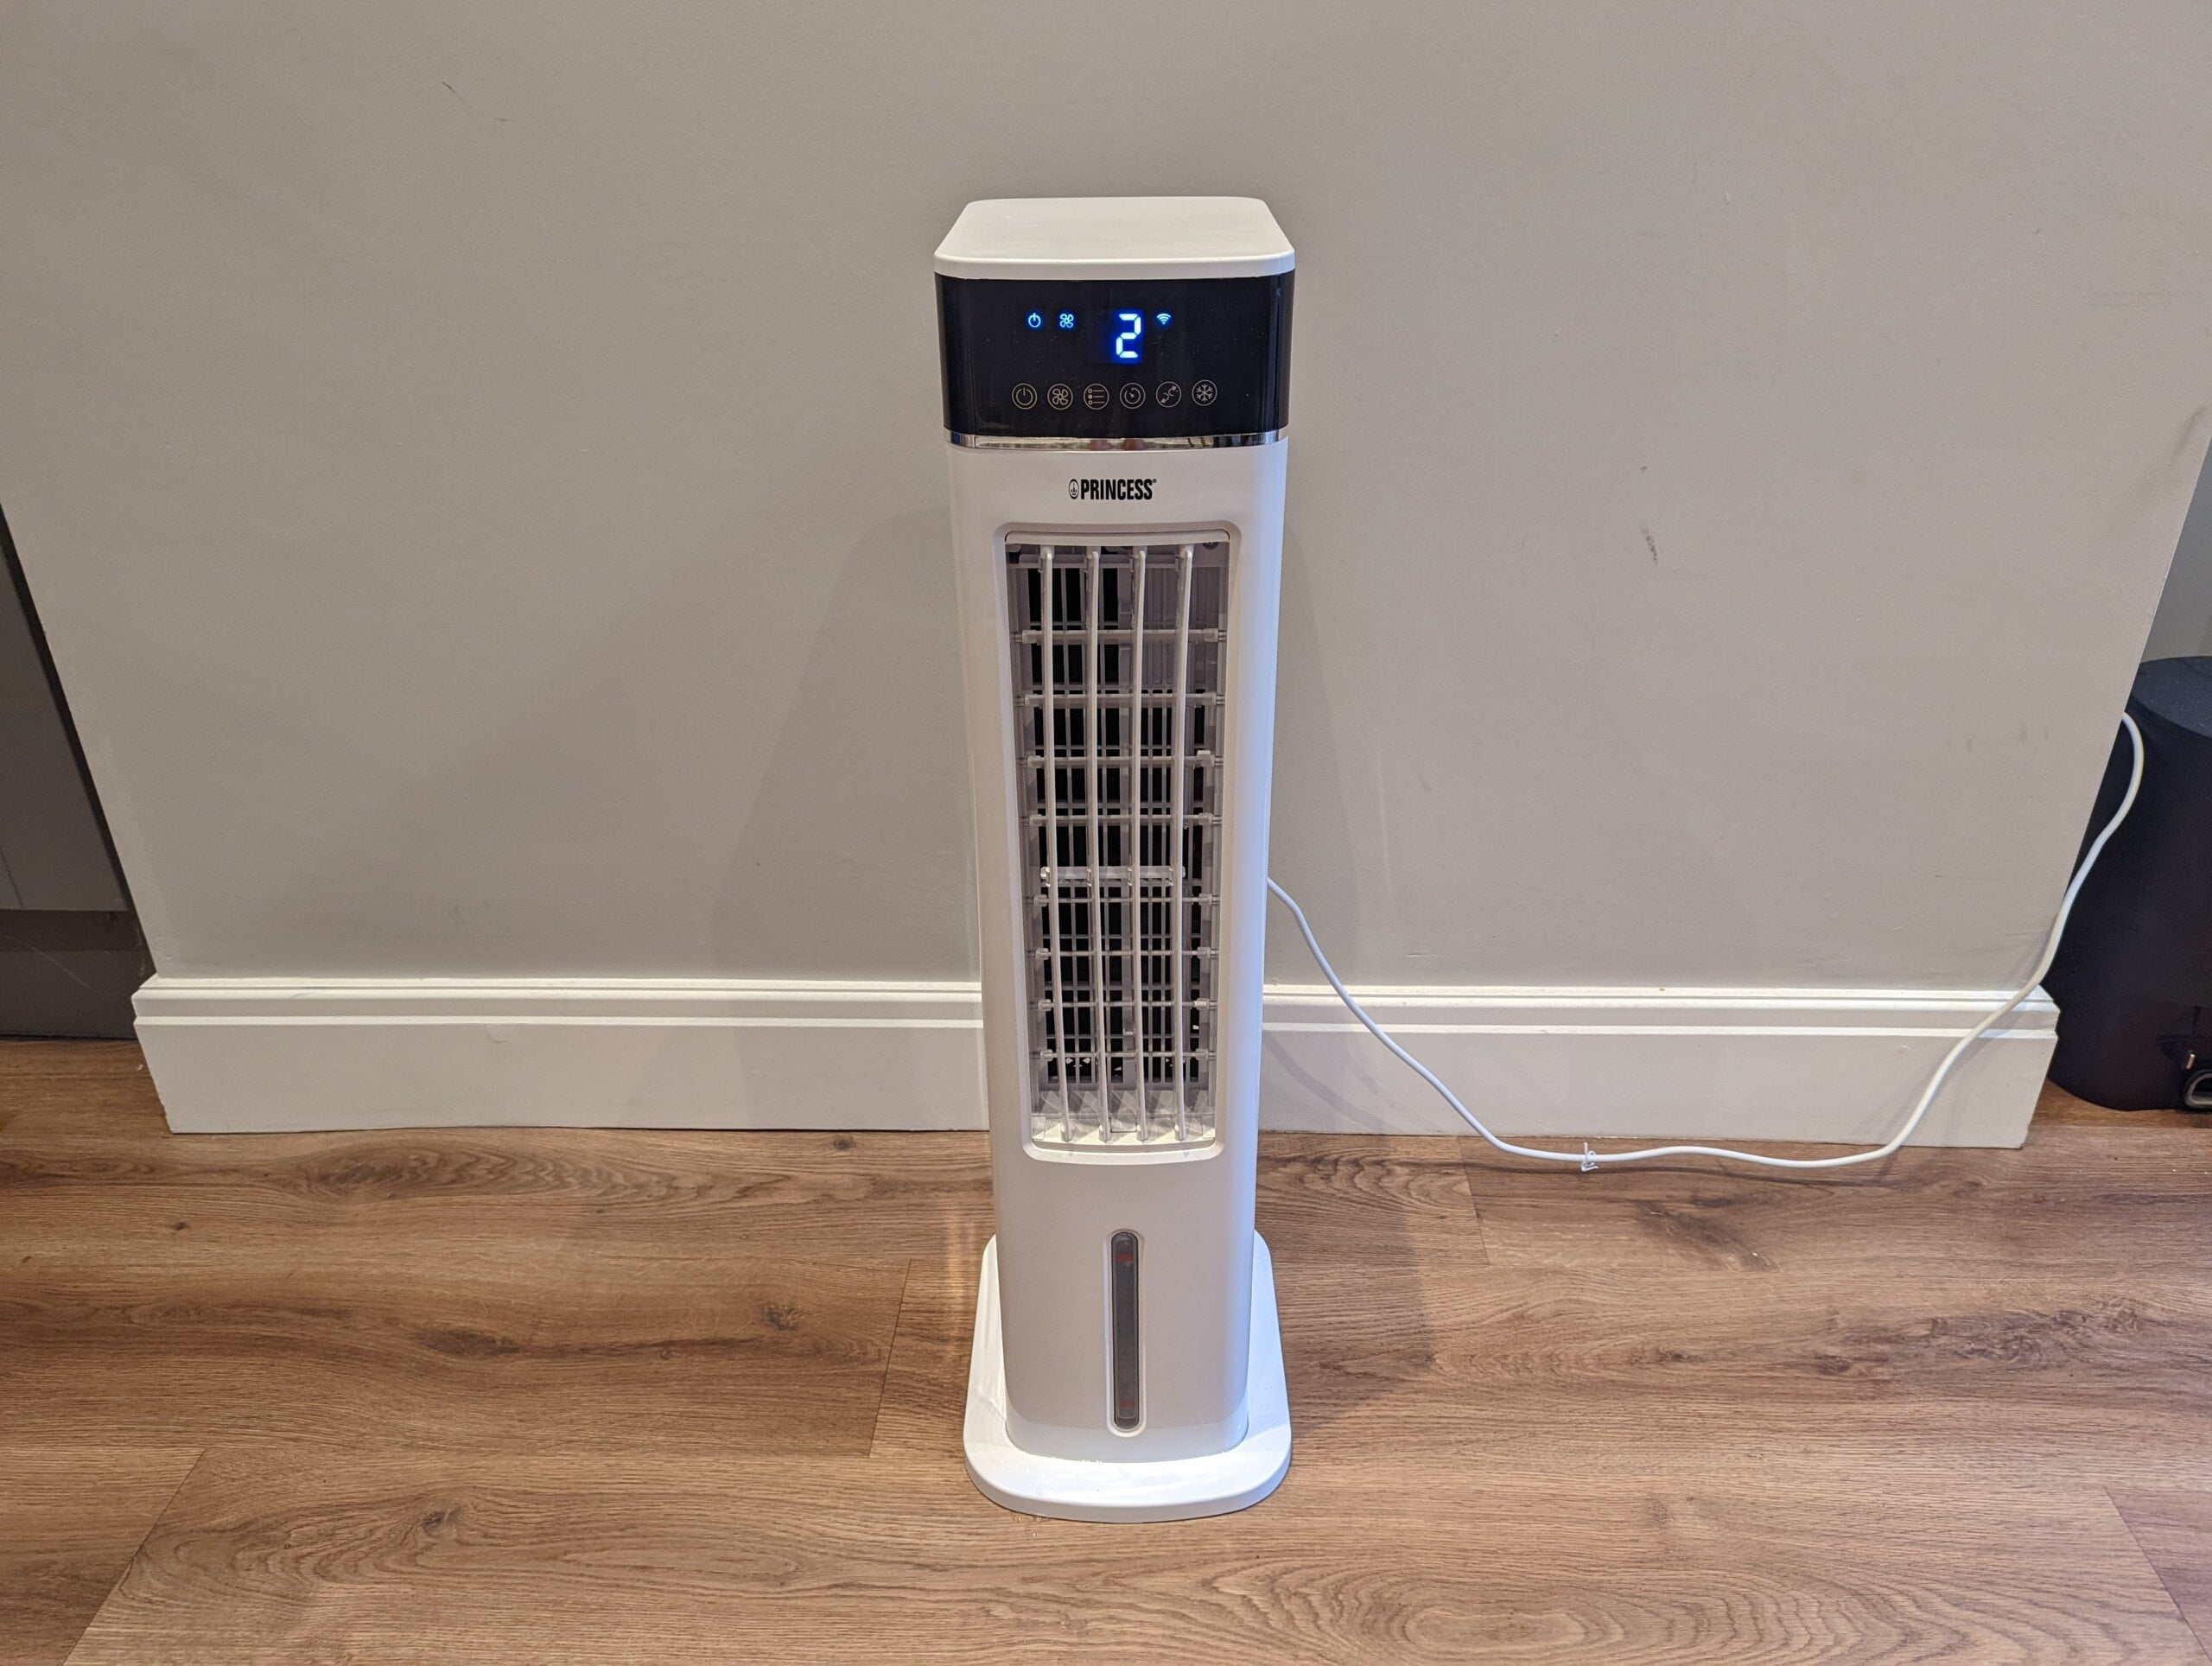 Princess Smart Air Cooler Review – A cheap alternative to air conditioning, but is it effective?